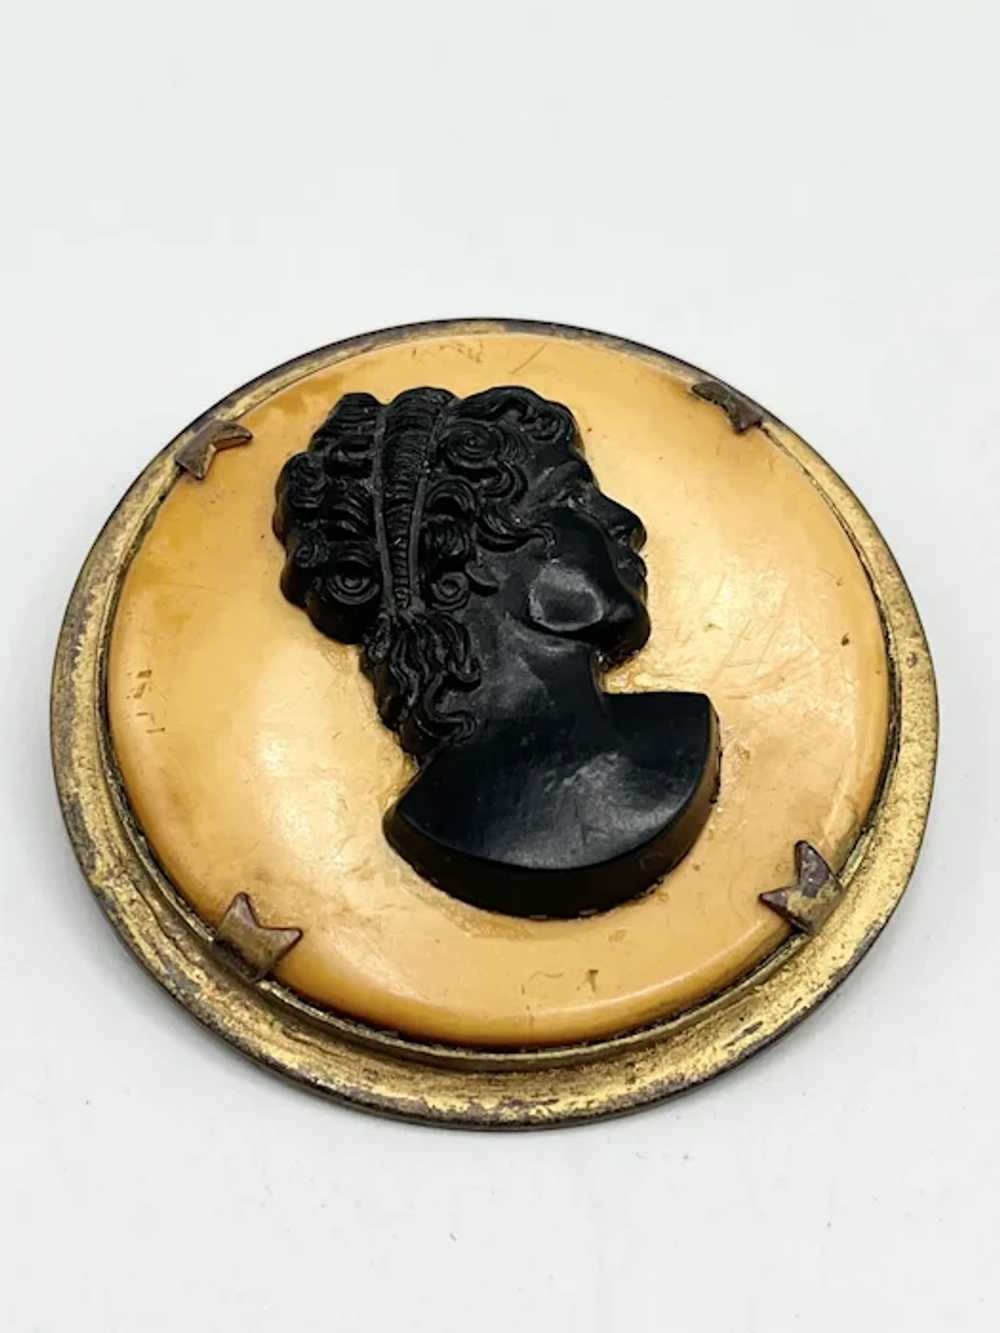 Vintage Black Cameo Celluloid Brooch Pin - image 2